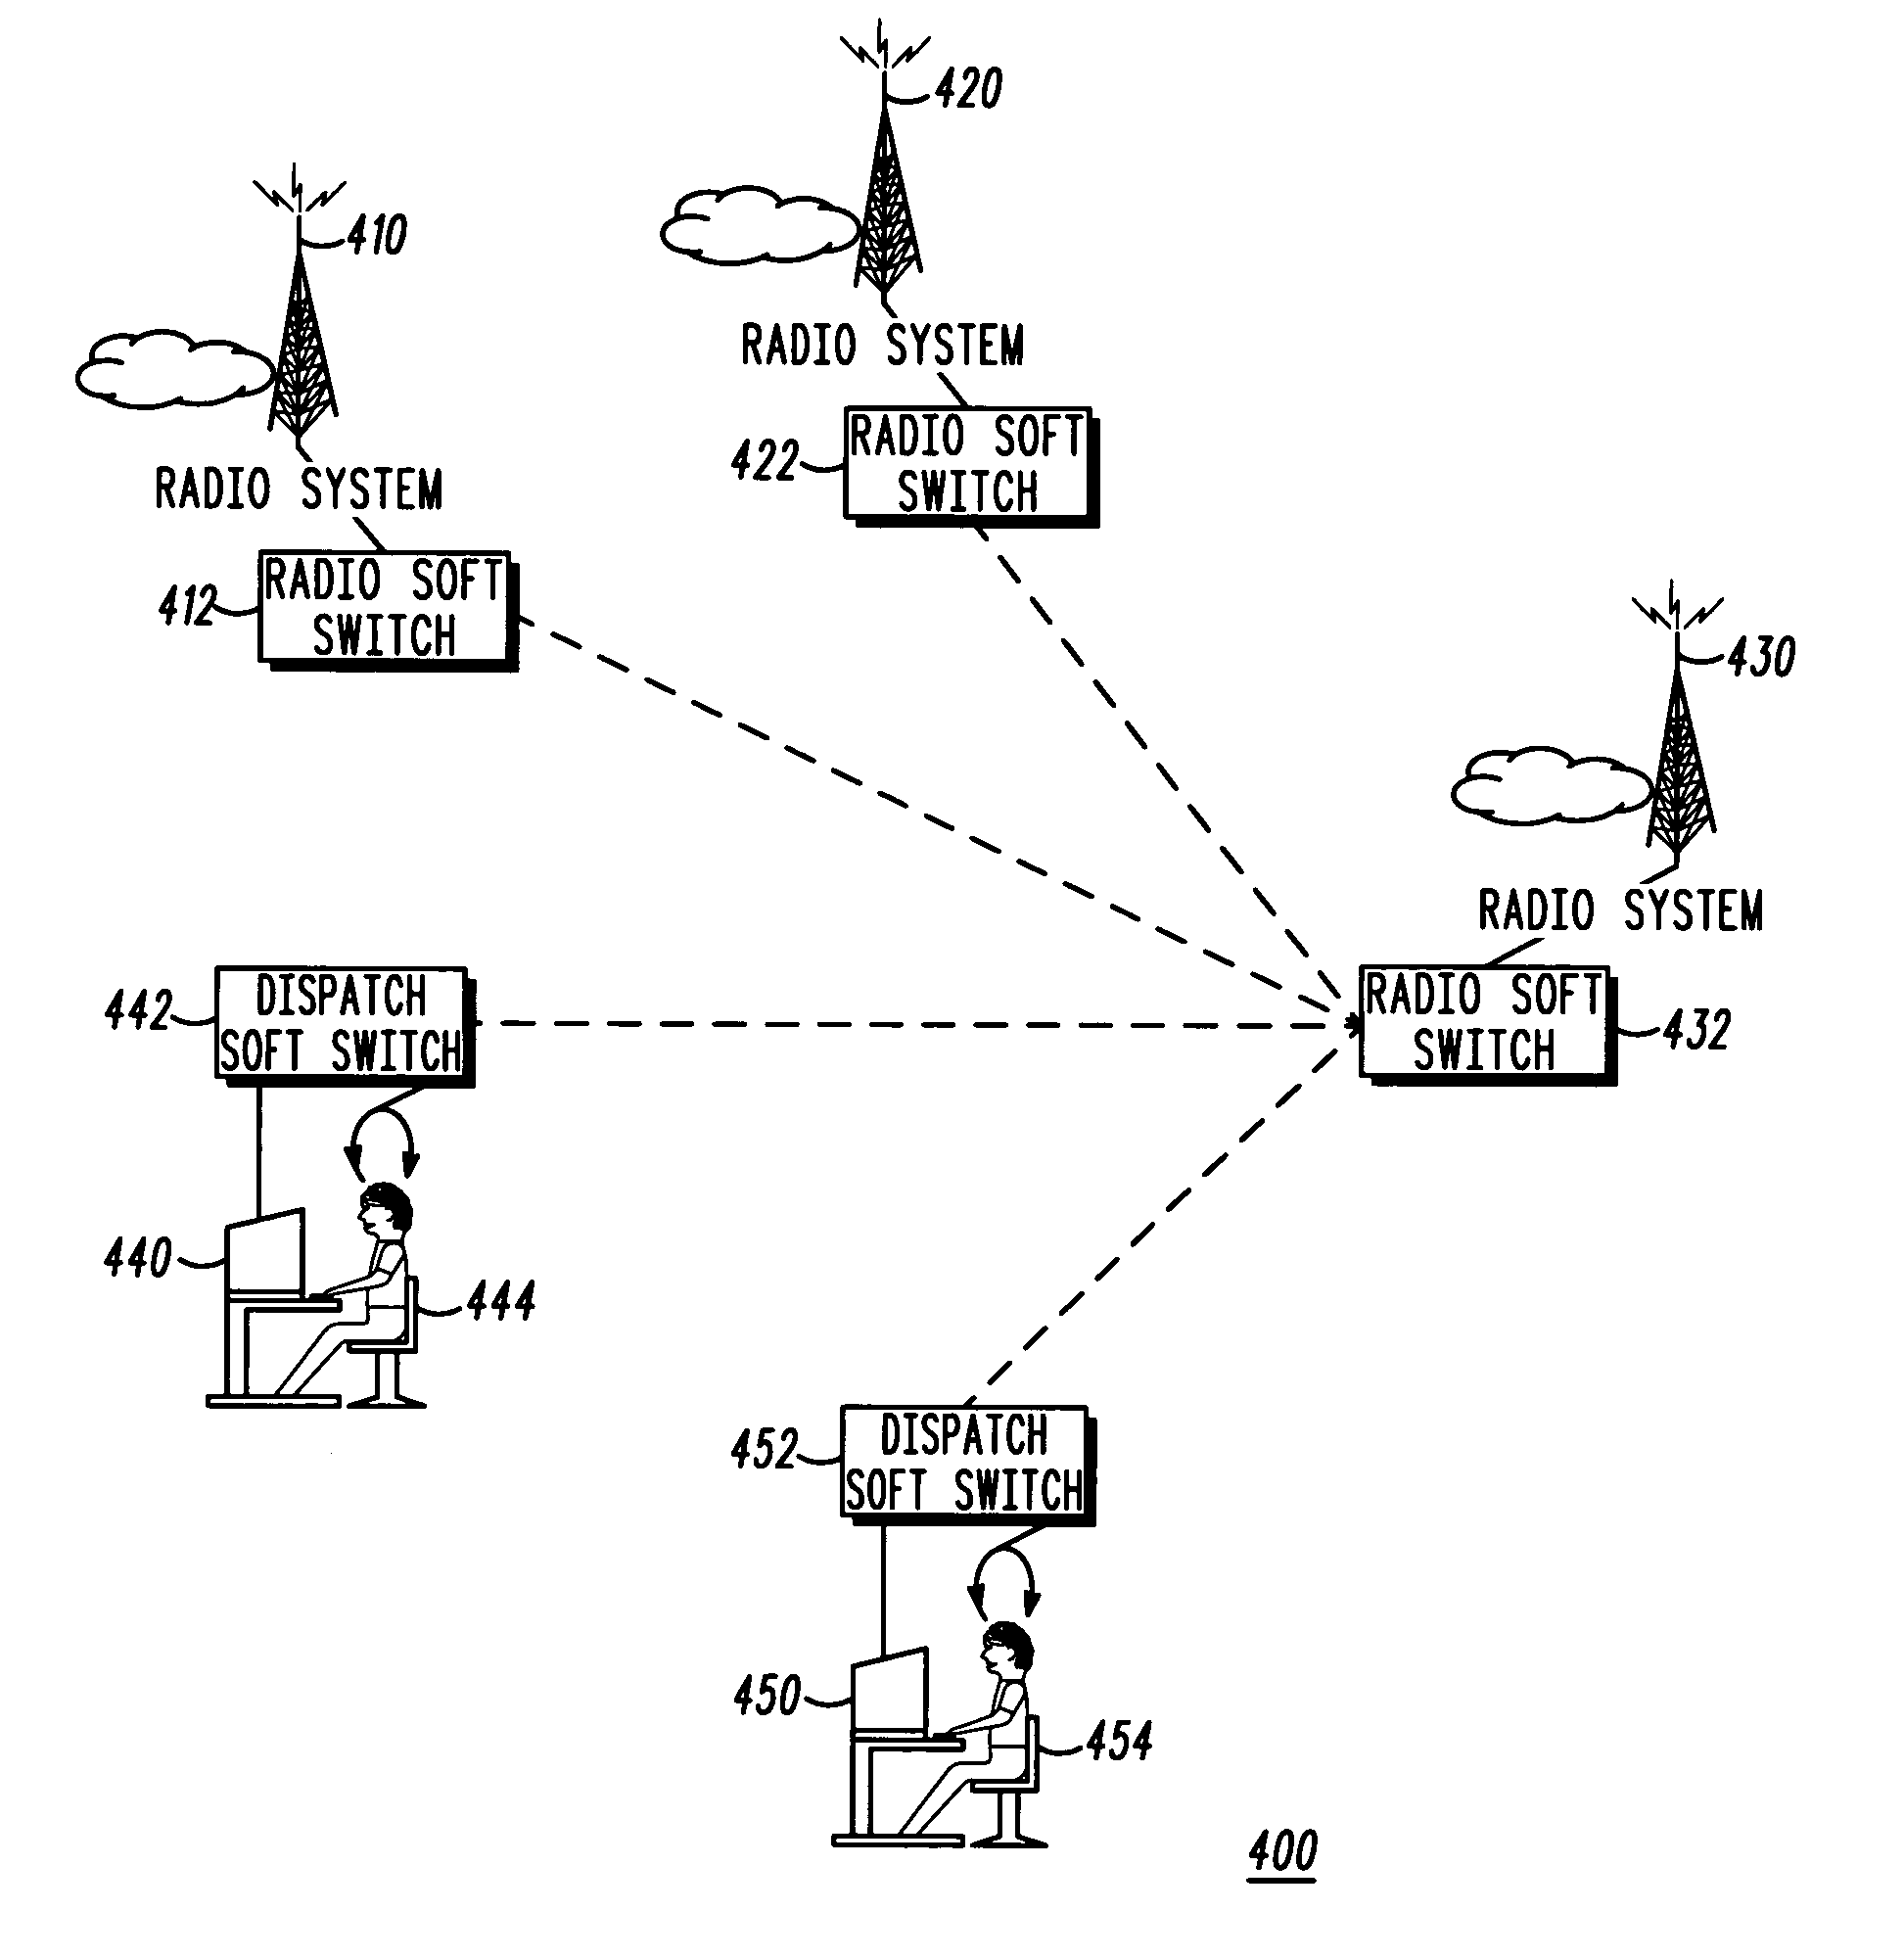 Method and apparatus for enabling interoperability between packet-switched systems